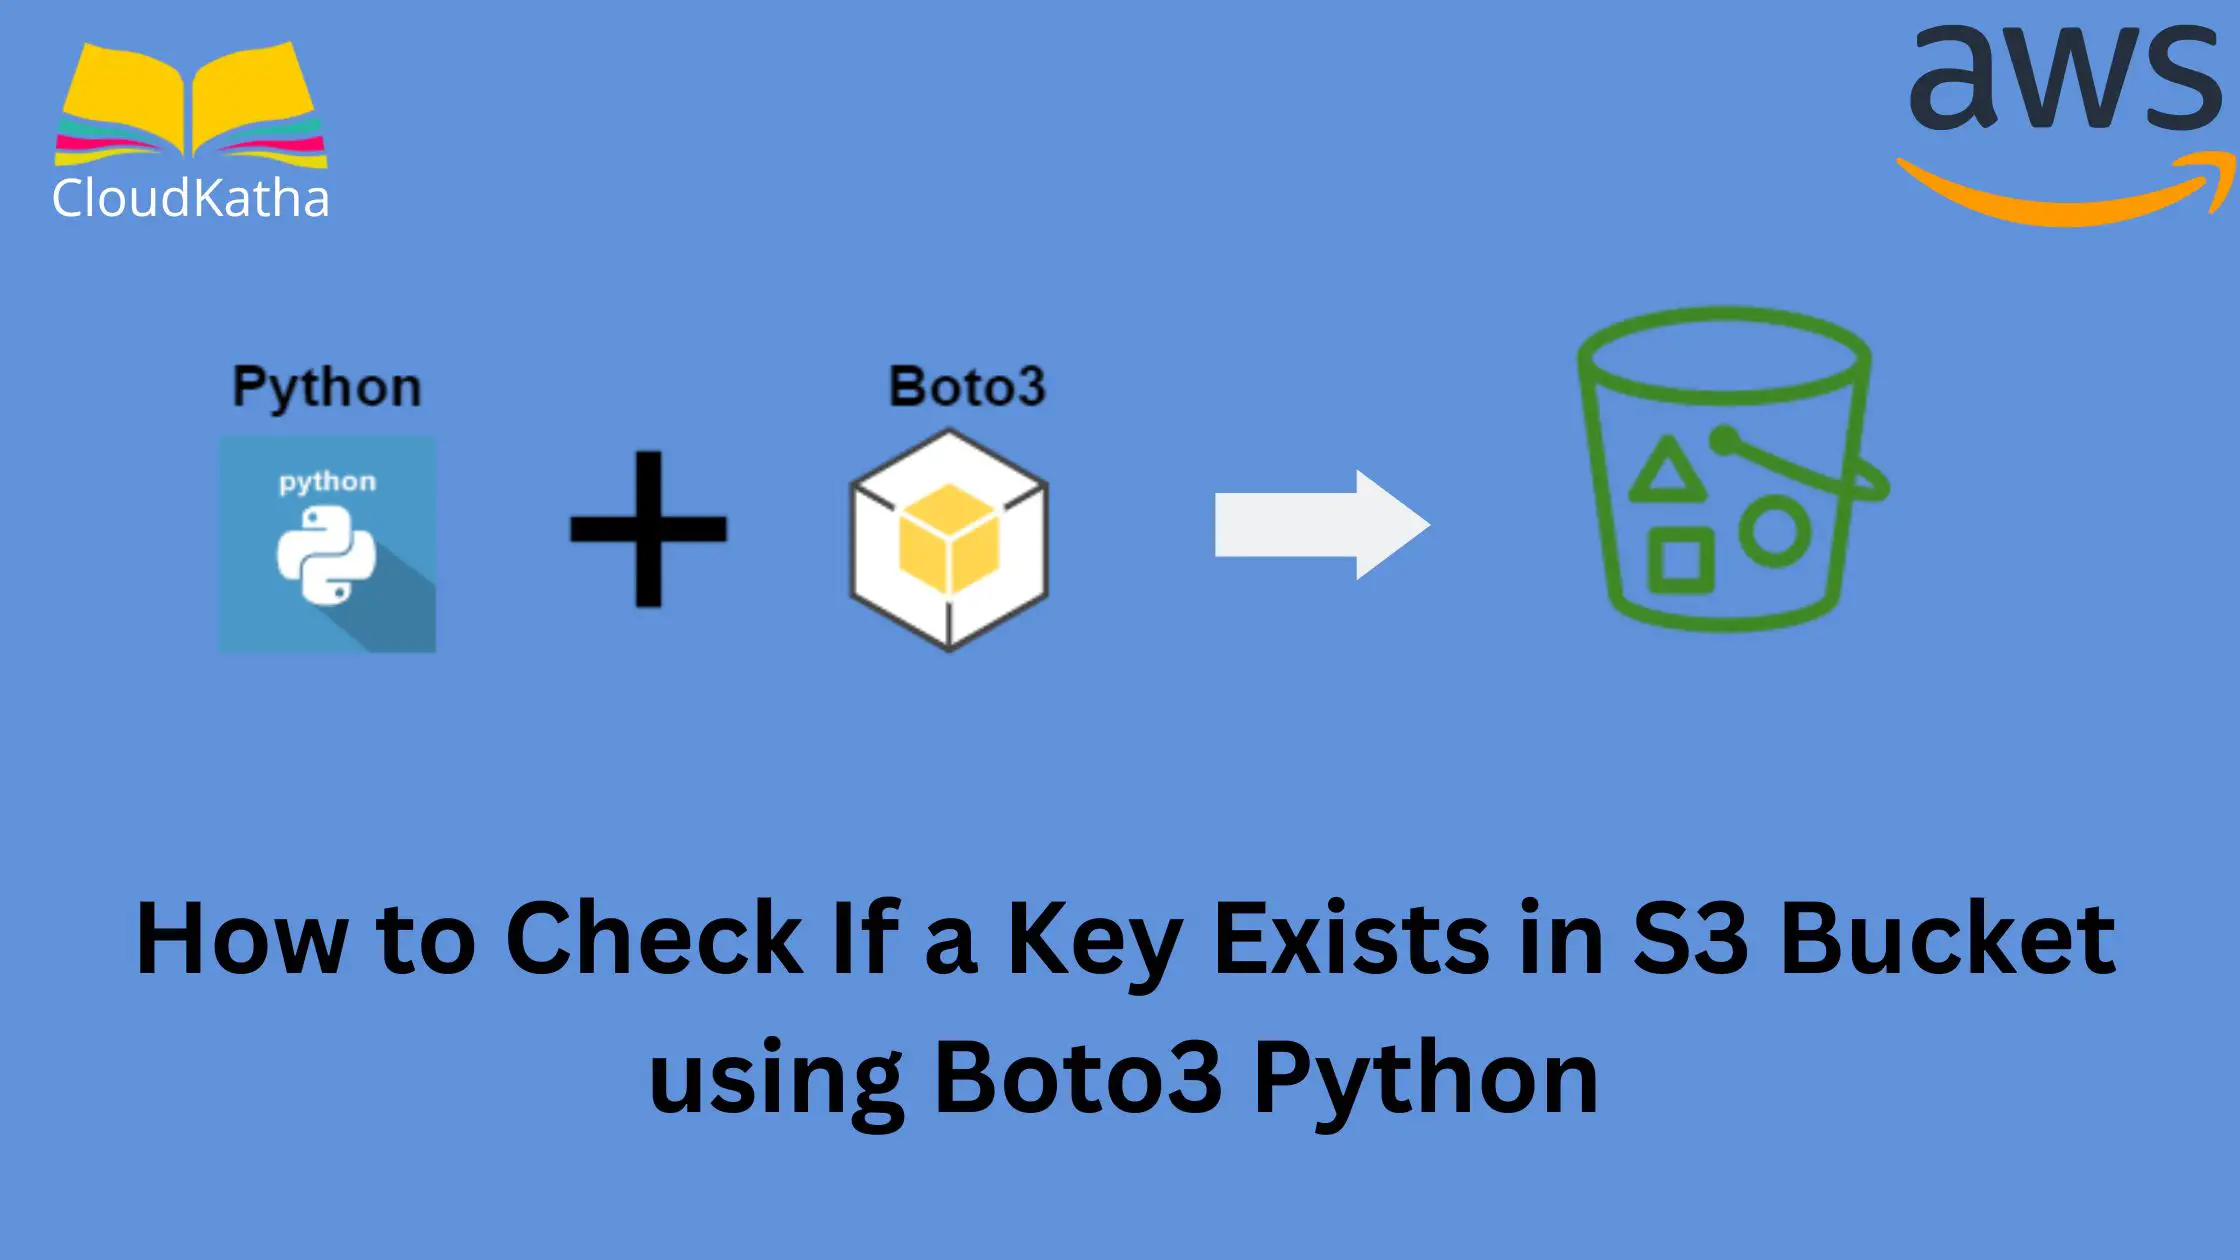 How to Check If a Key Exists in S3 Bucket using Boto3 Python